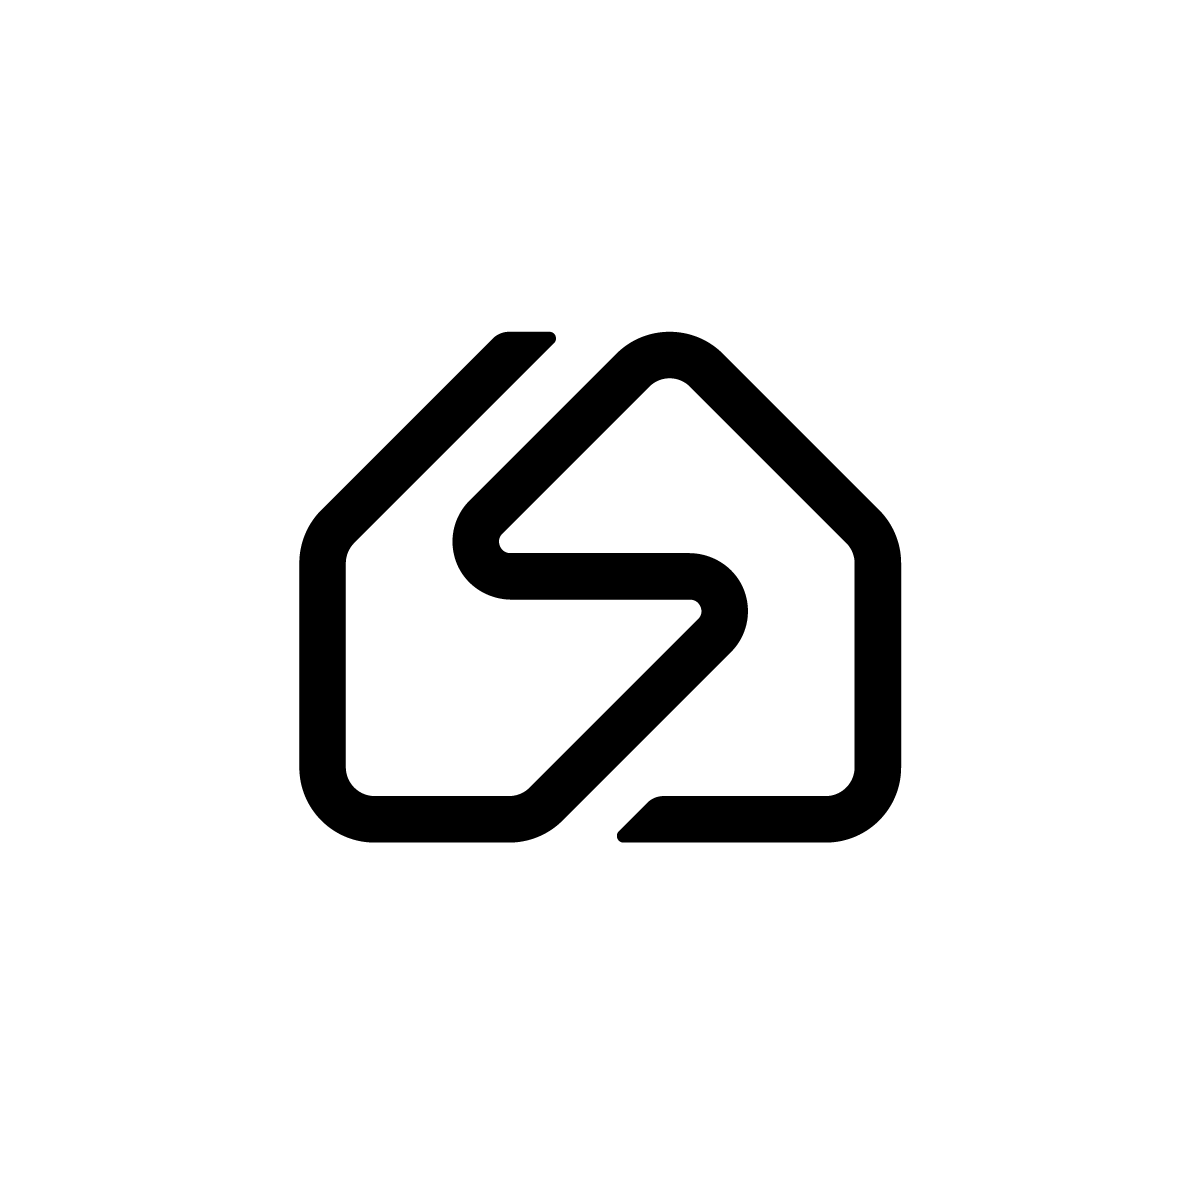 S House Logo elegantly stylizes the letter 'S' into a modern house structure, showcasing sophistication and simplicity, perfect for real estate agencies, property developers, and architecture firms.